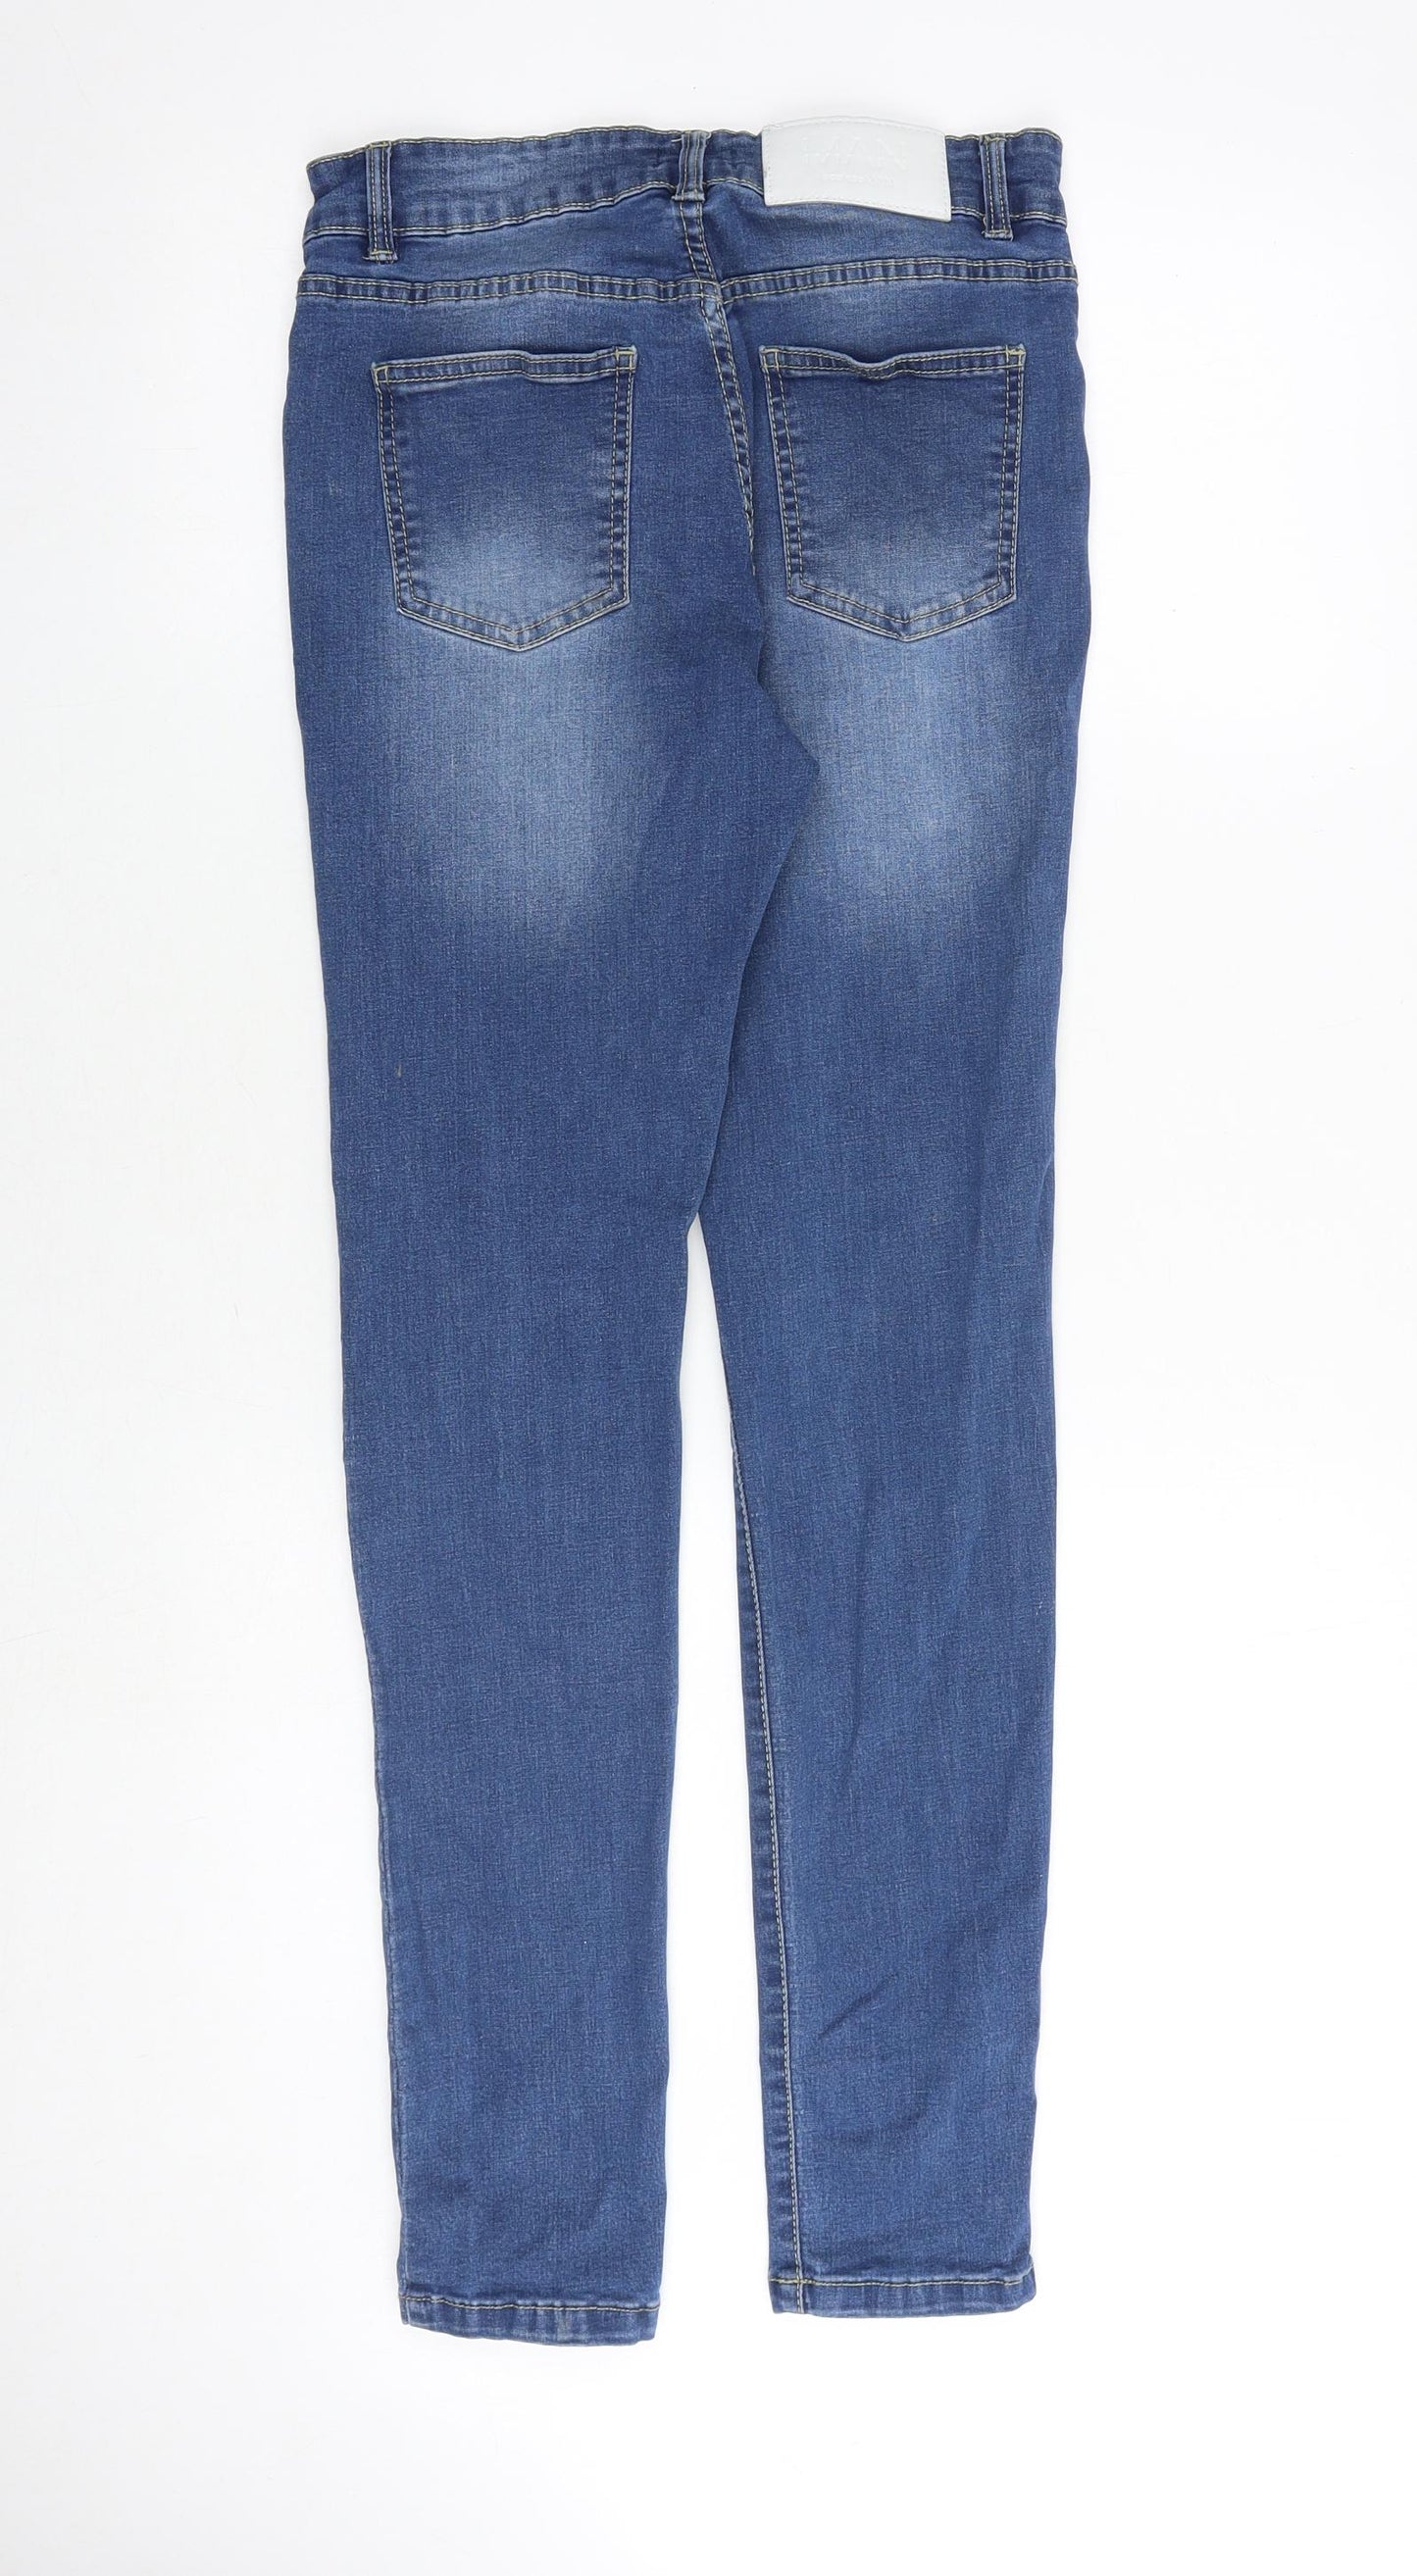 Boohoo Mens Blue Cotton Skinny Jeans Size 30 in Slim Button